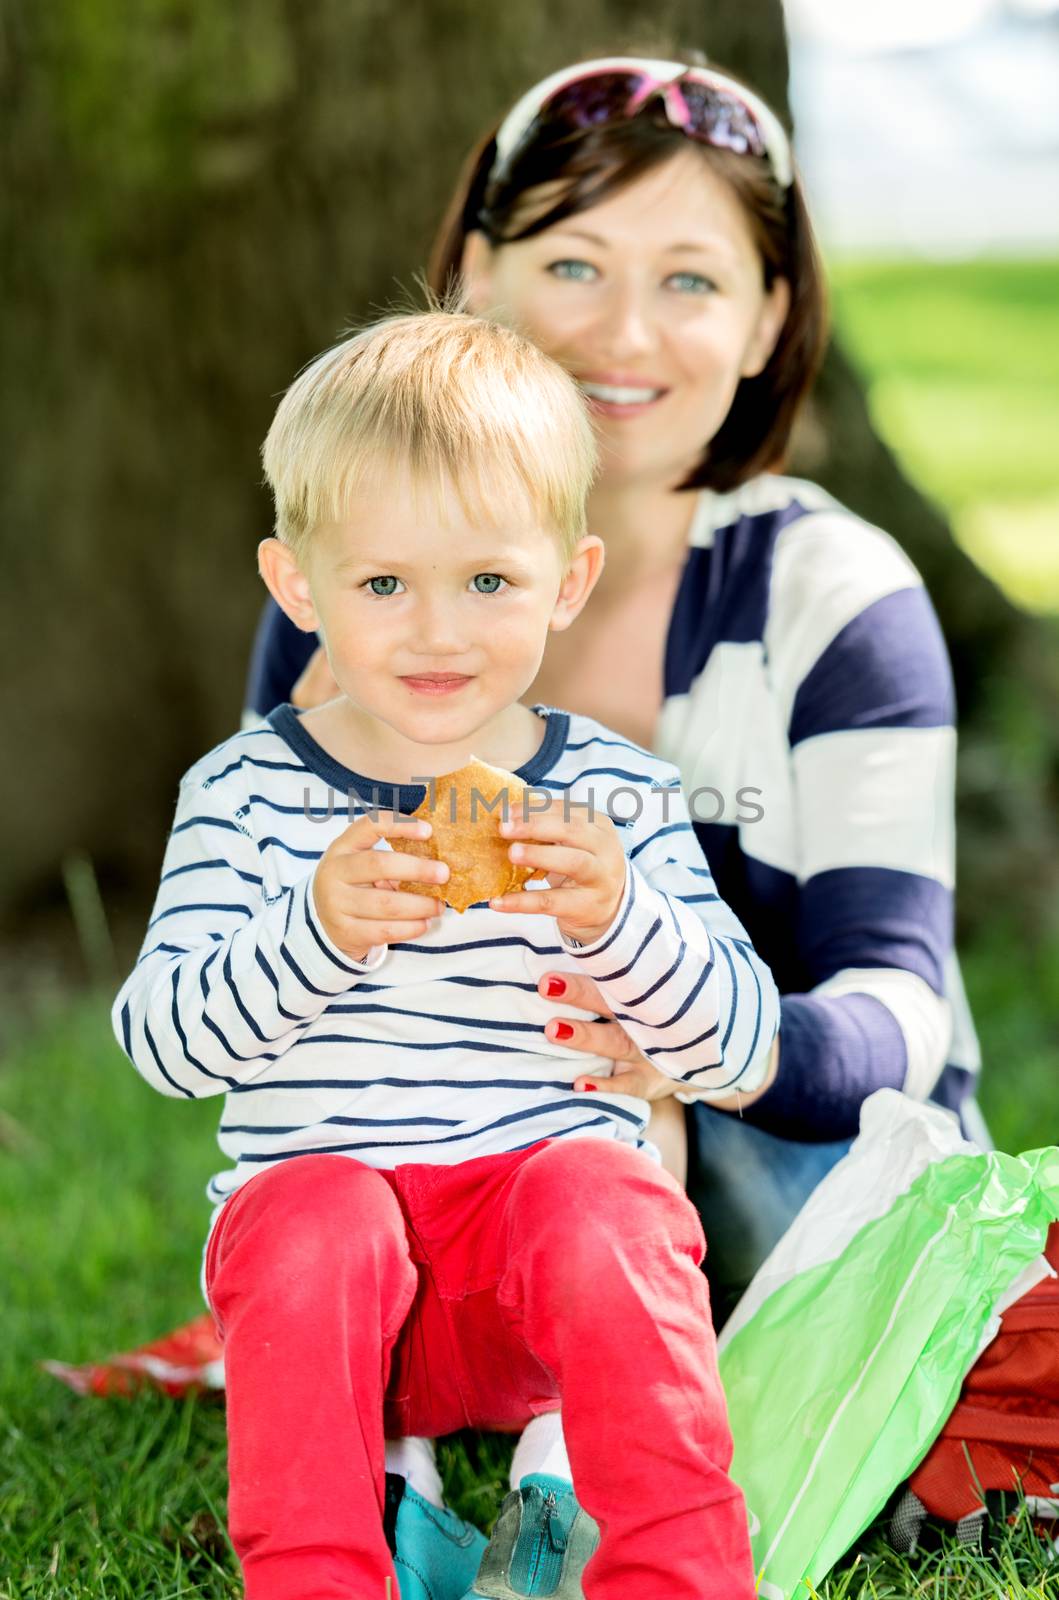 Lovely portrait of a mother and son outdoor at picnic by Nanisimova